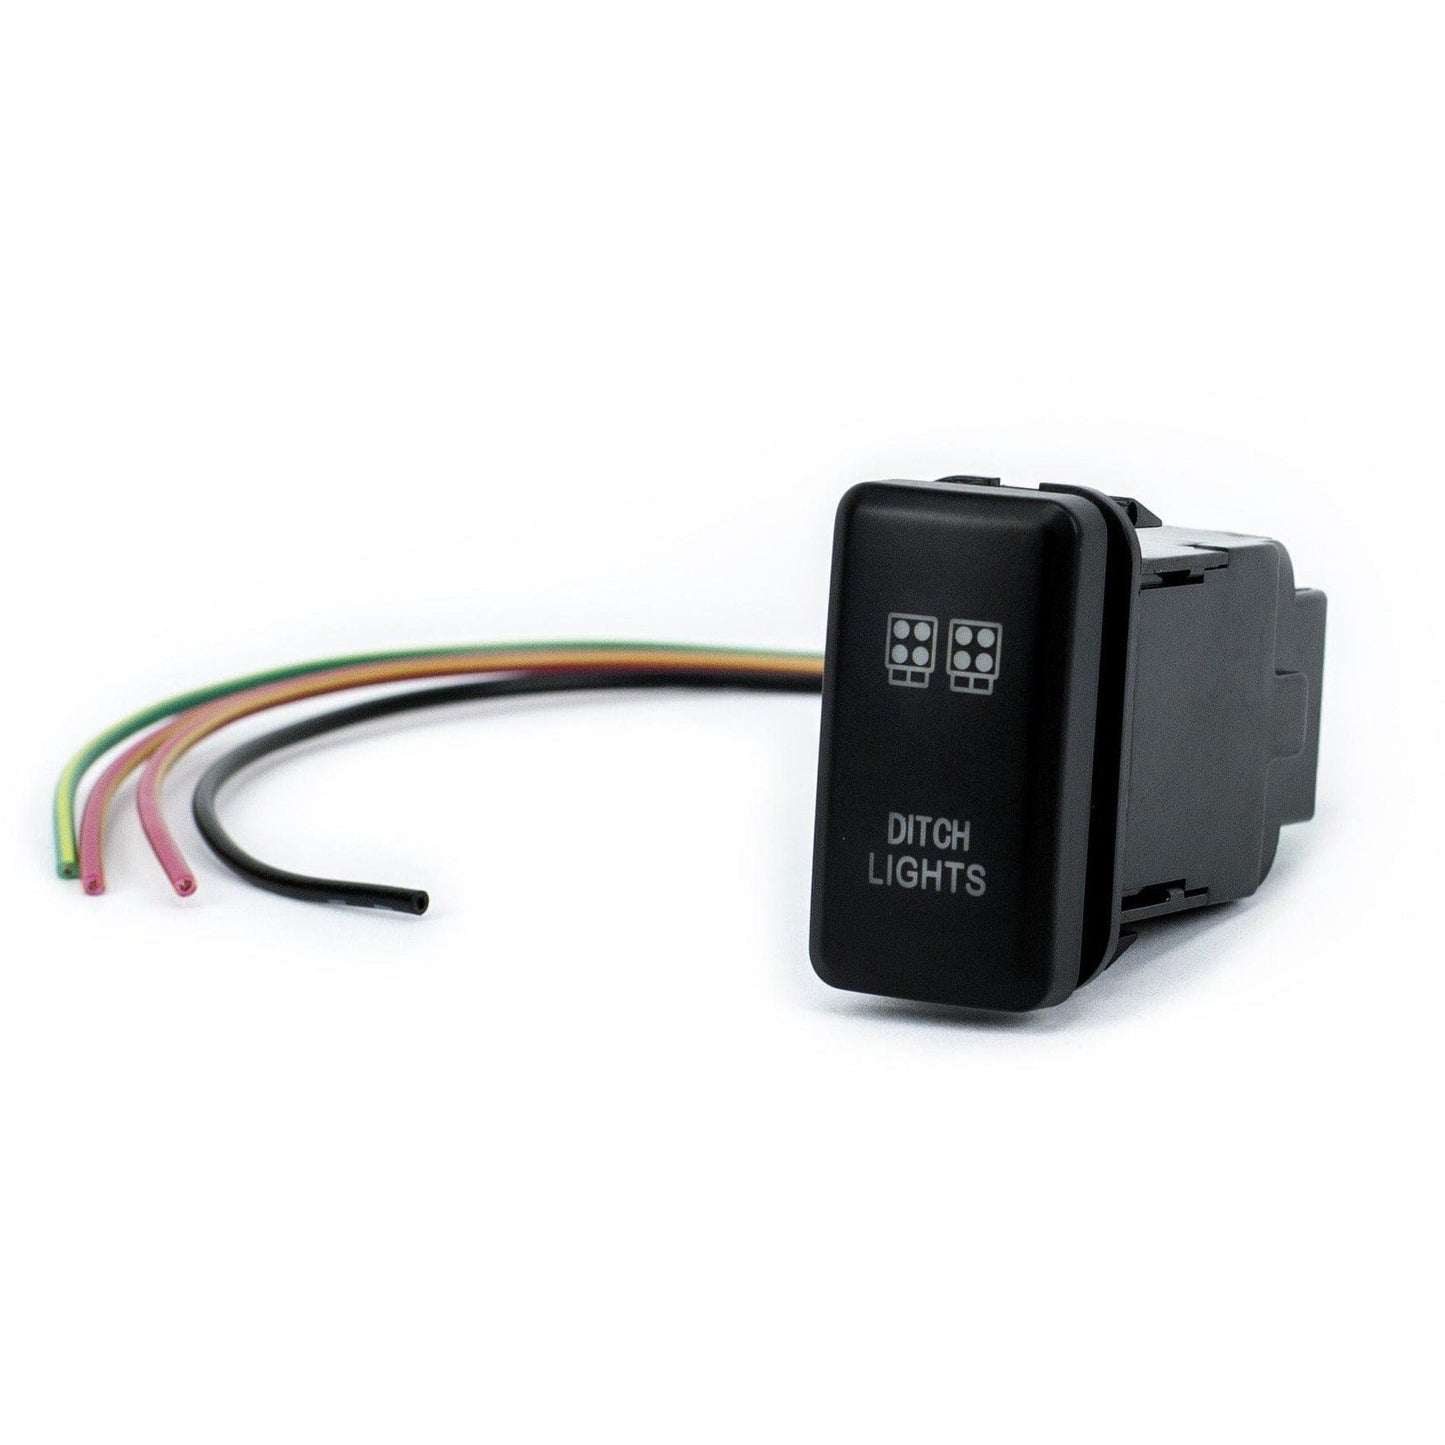 Cali Raised LED Switches Toyota OEM Style "DITCH LIGHTS" Switch